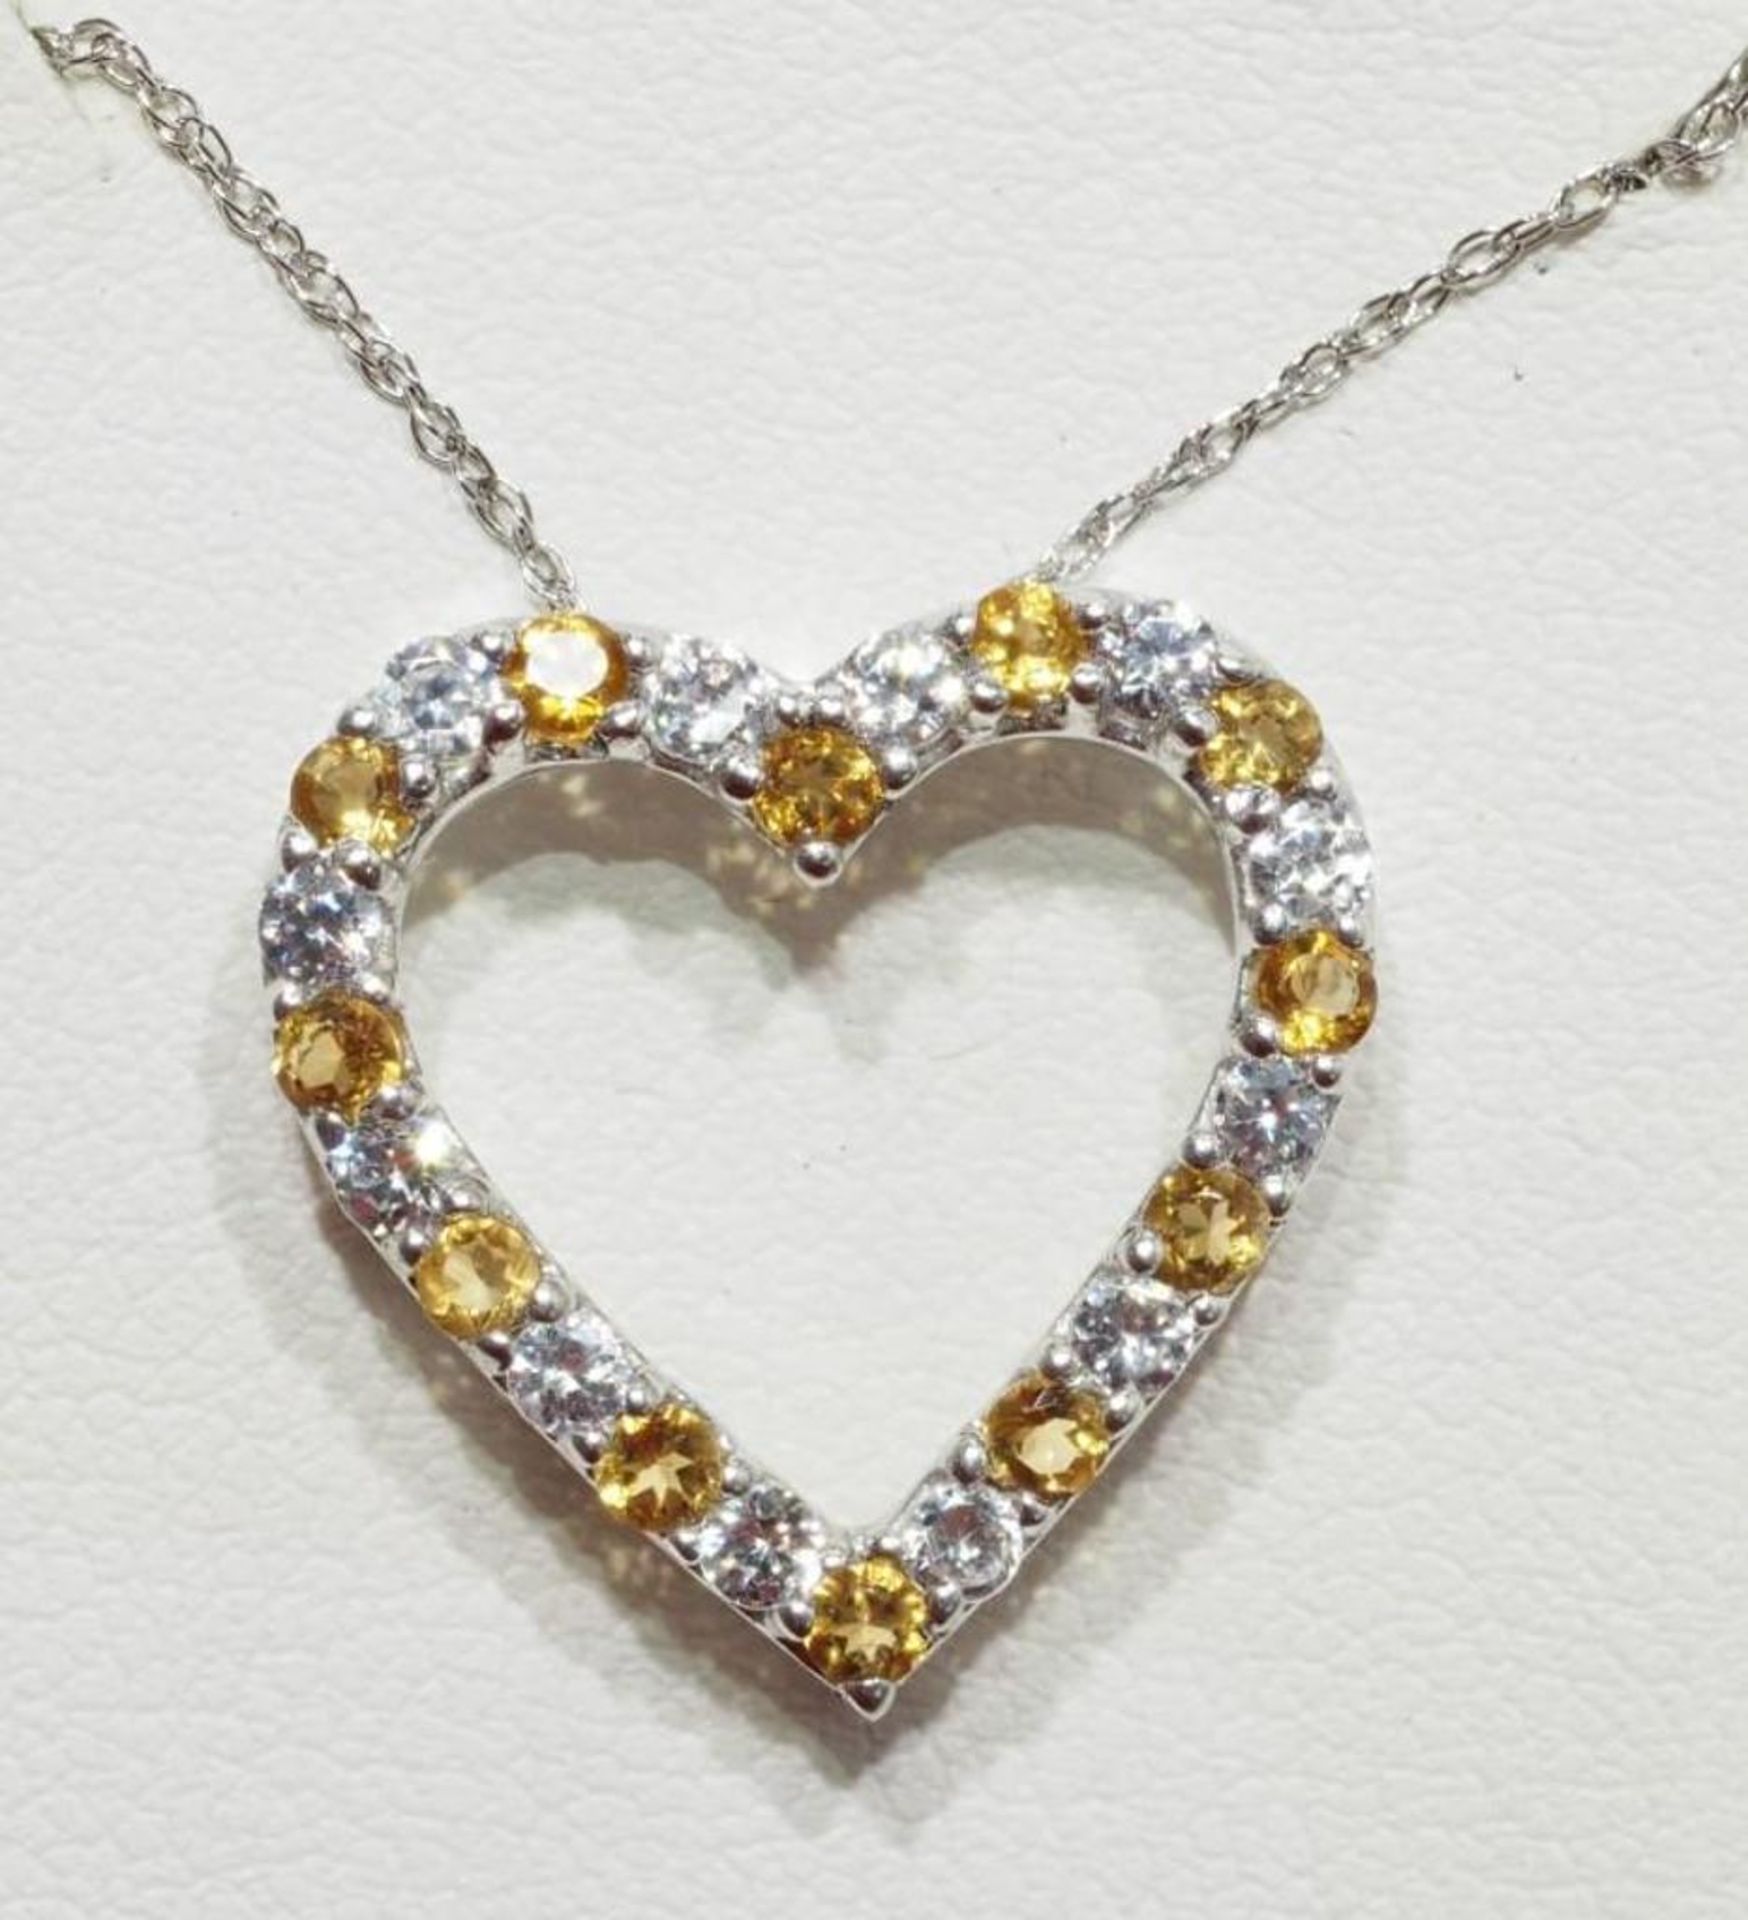 Sterling Silver Citrine (November Birthstone) Heart Shaped Necklace Retail $150